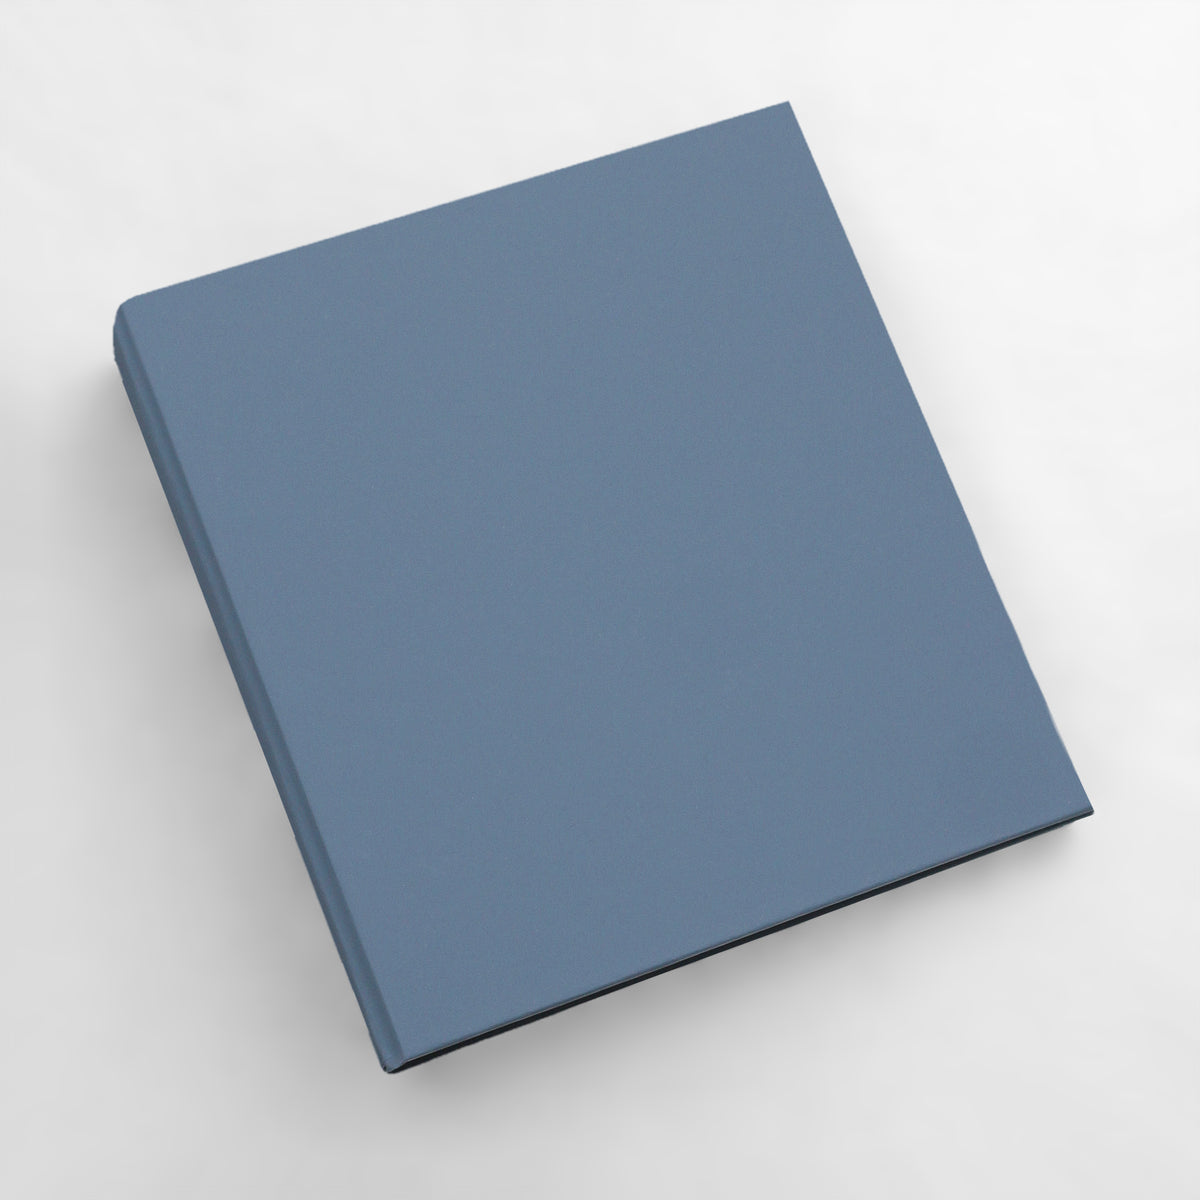 Medium Photo Binder For 4x6 Photos | Cover: Ocean Blue Vegan Leather | Available Personalized